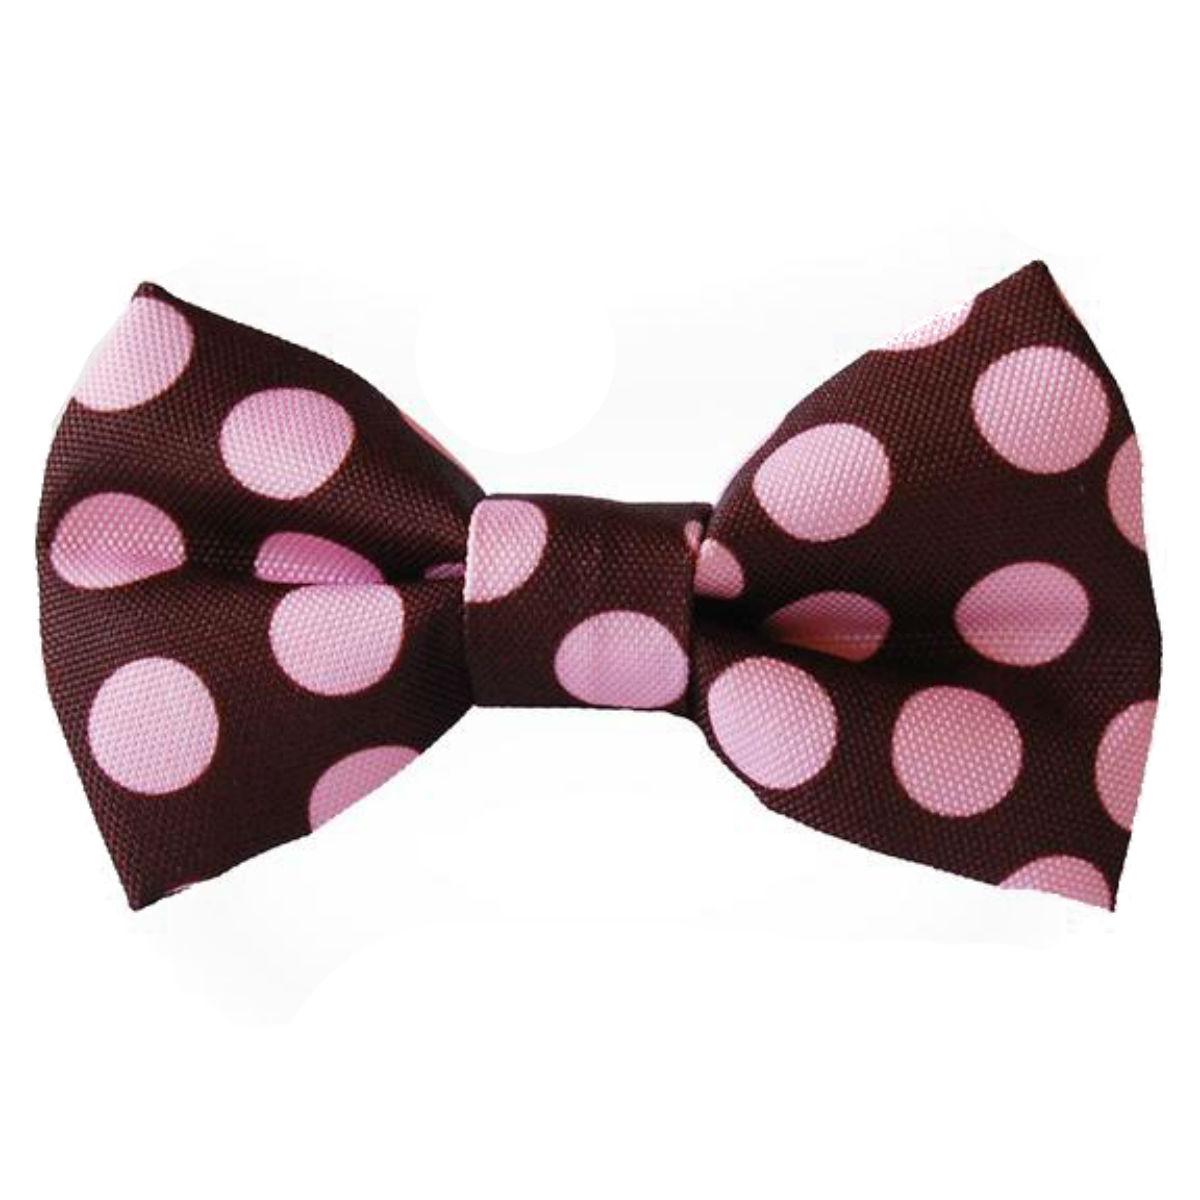 WaLk-e-Woo Bow Tie Dog Collar Attachment - Pink on Brown Dot